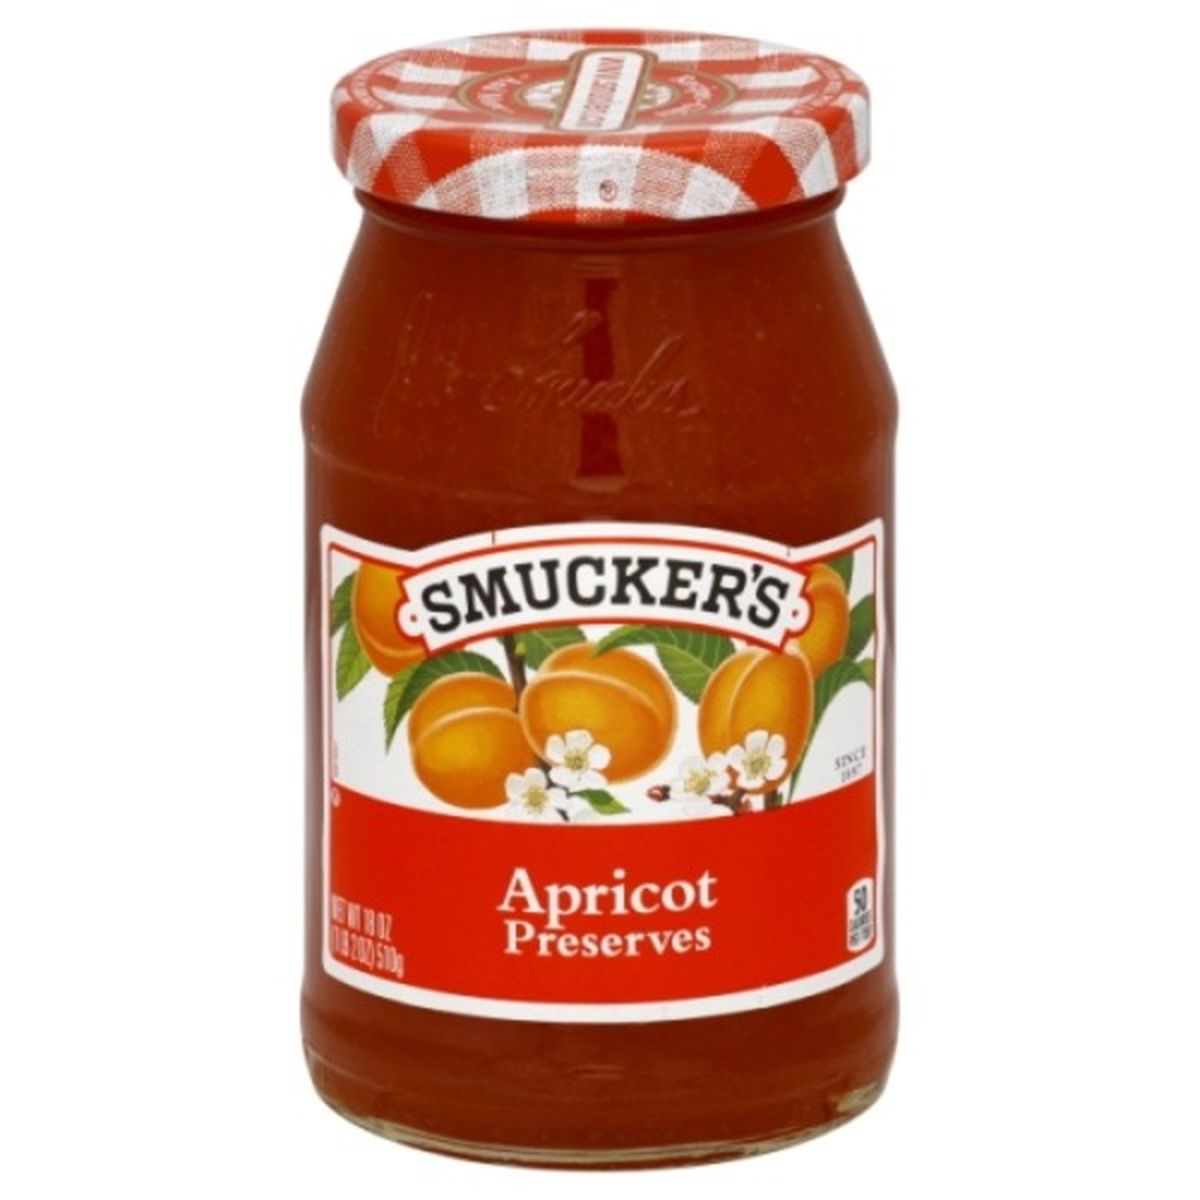 Calories in Smucker's Preserves, Apricot